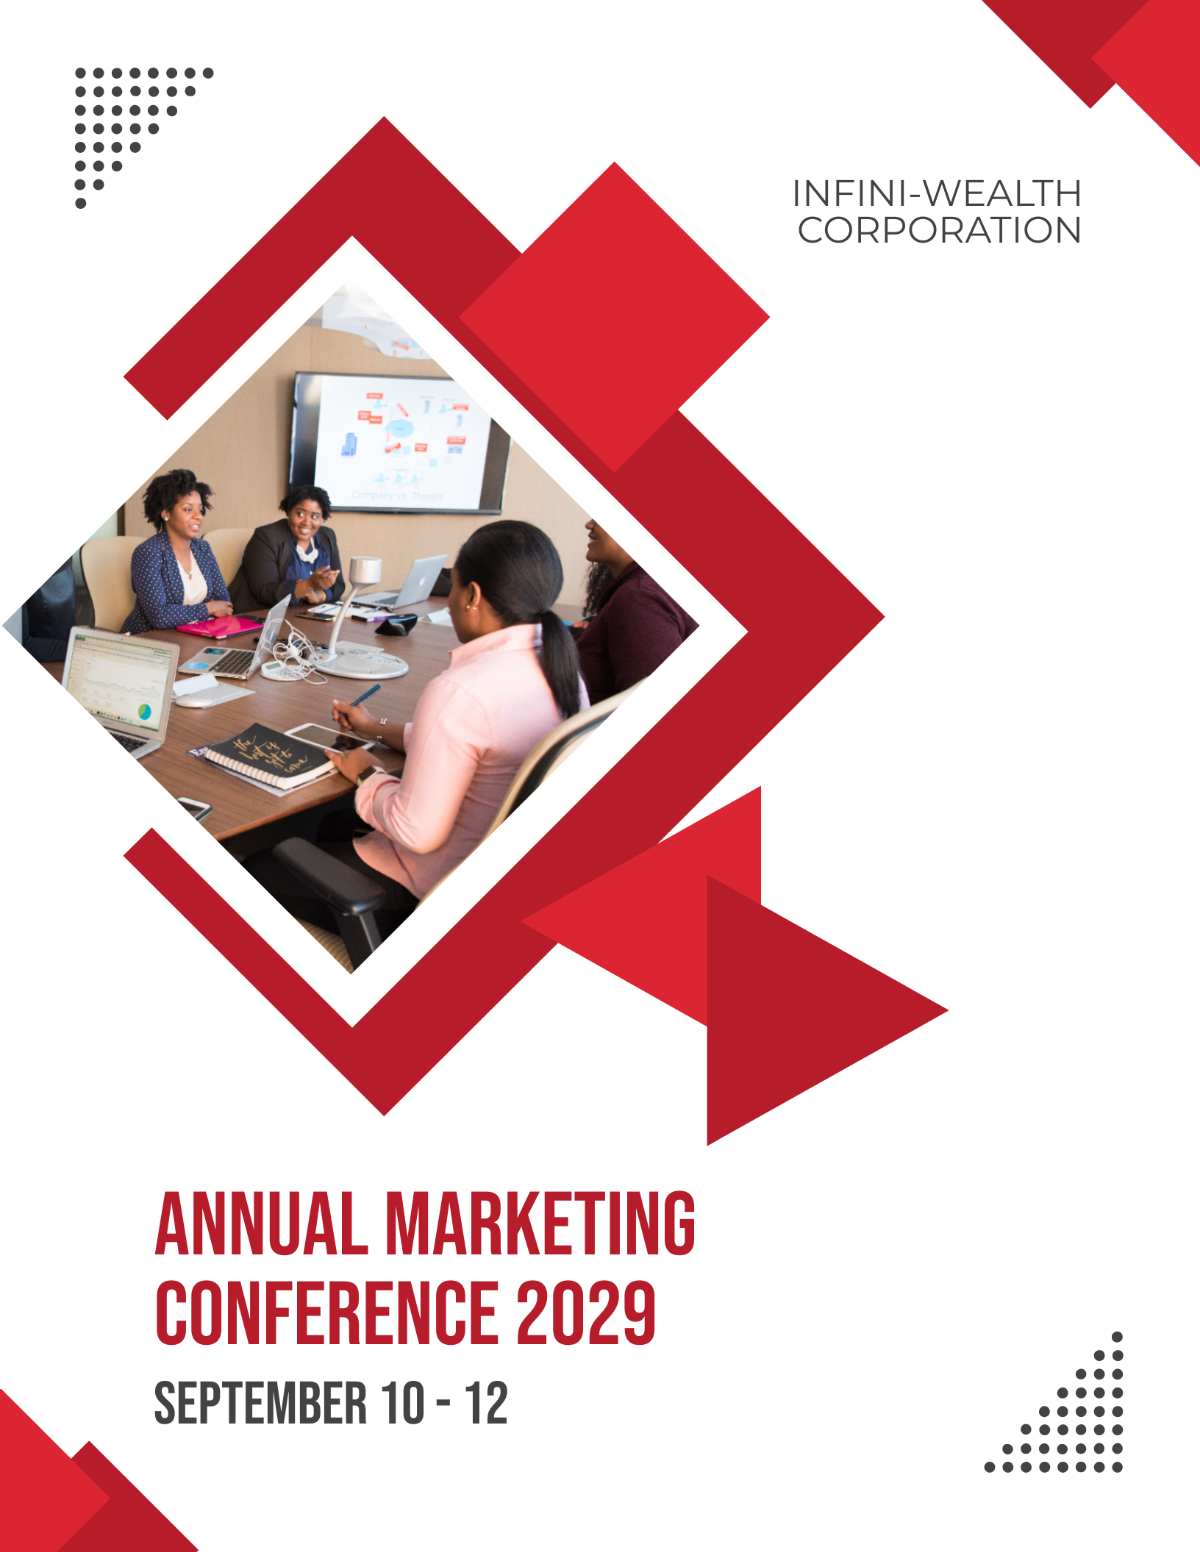 Marketing Conference Flyer Template